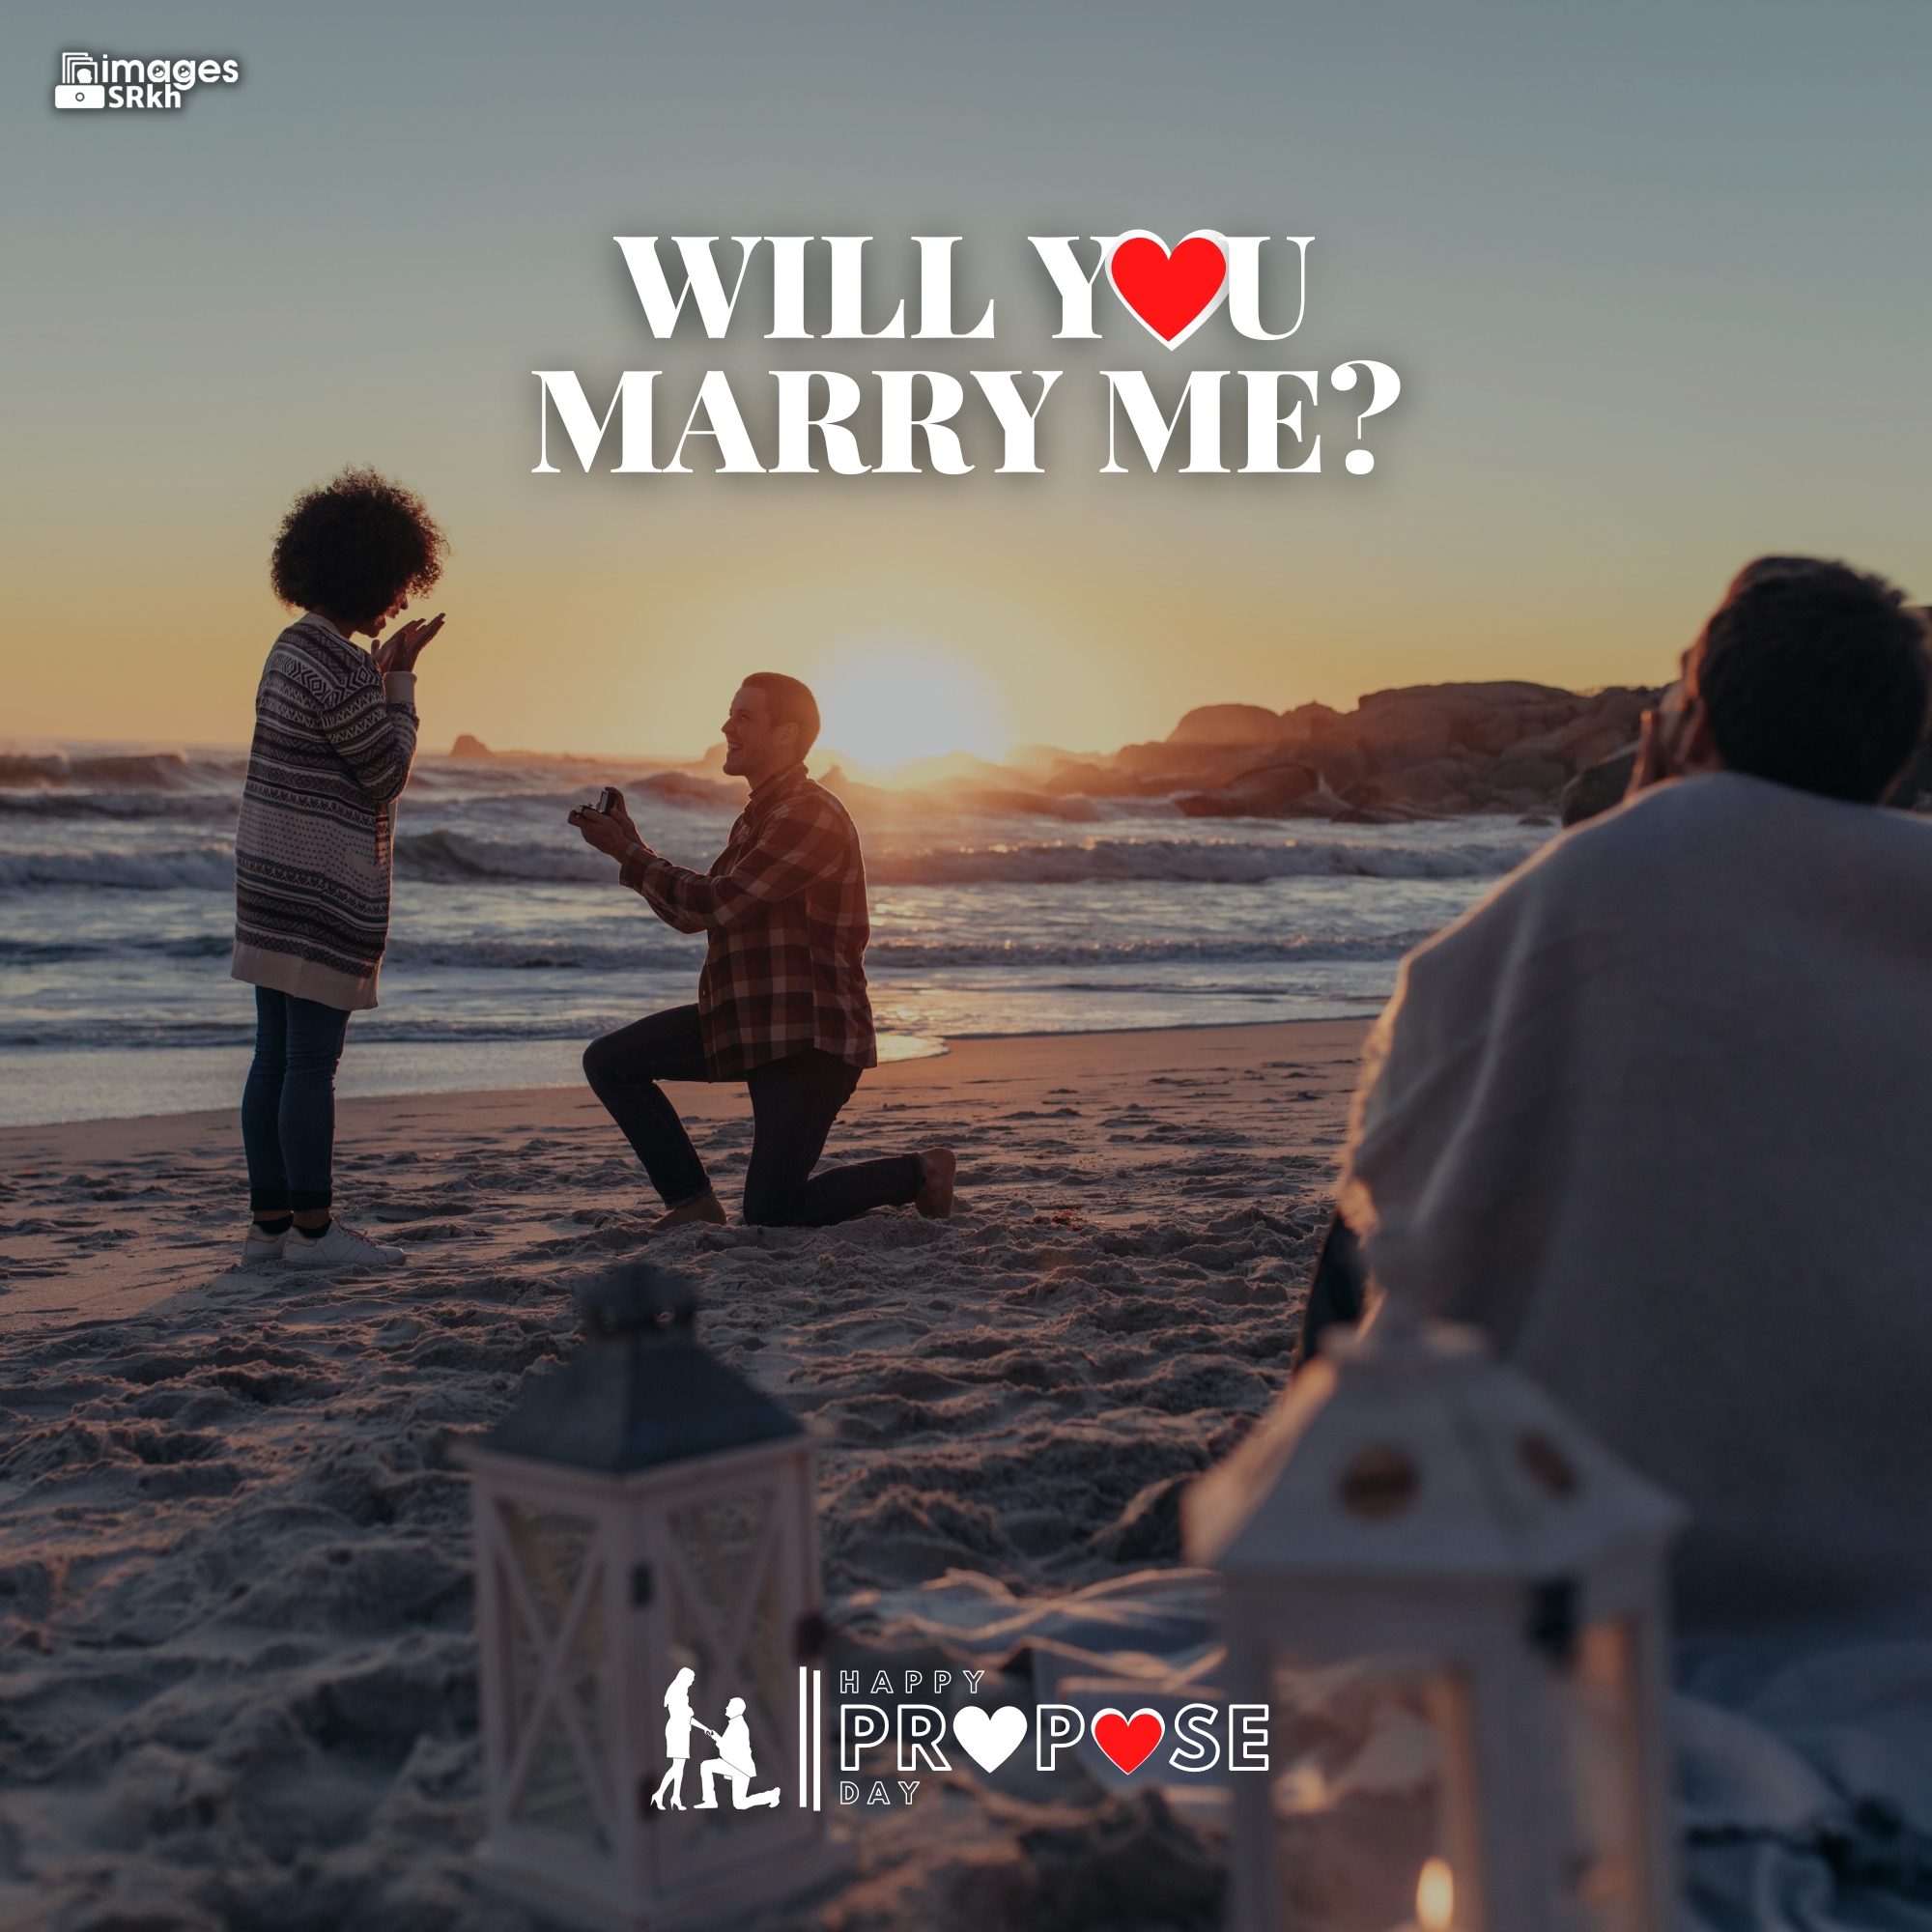 Propose Day Images | 284 | Will You MARRY ME